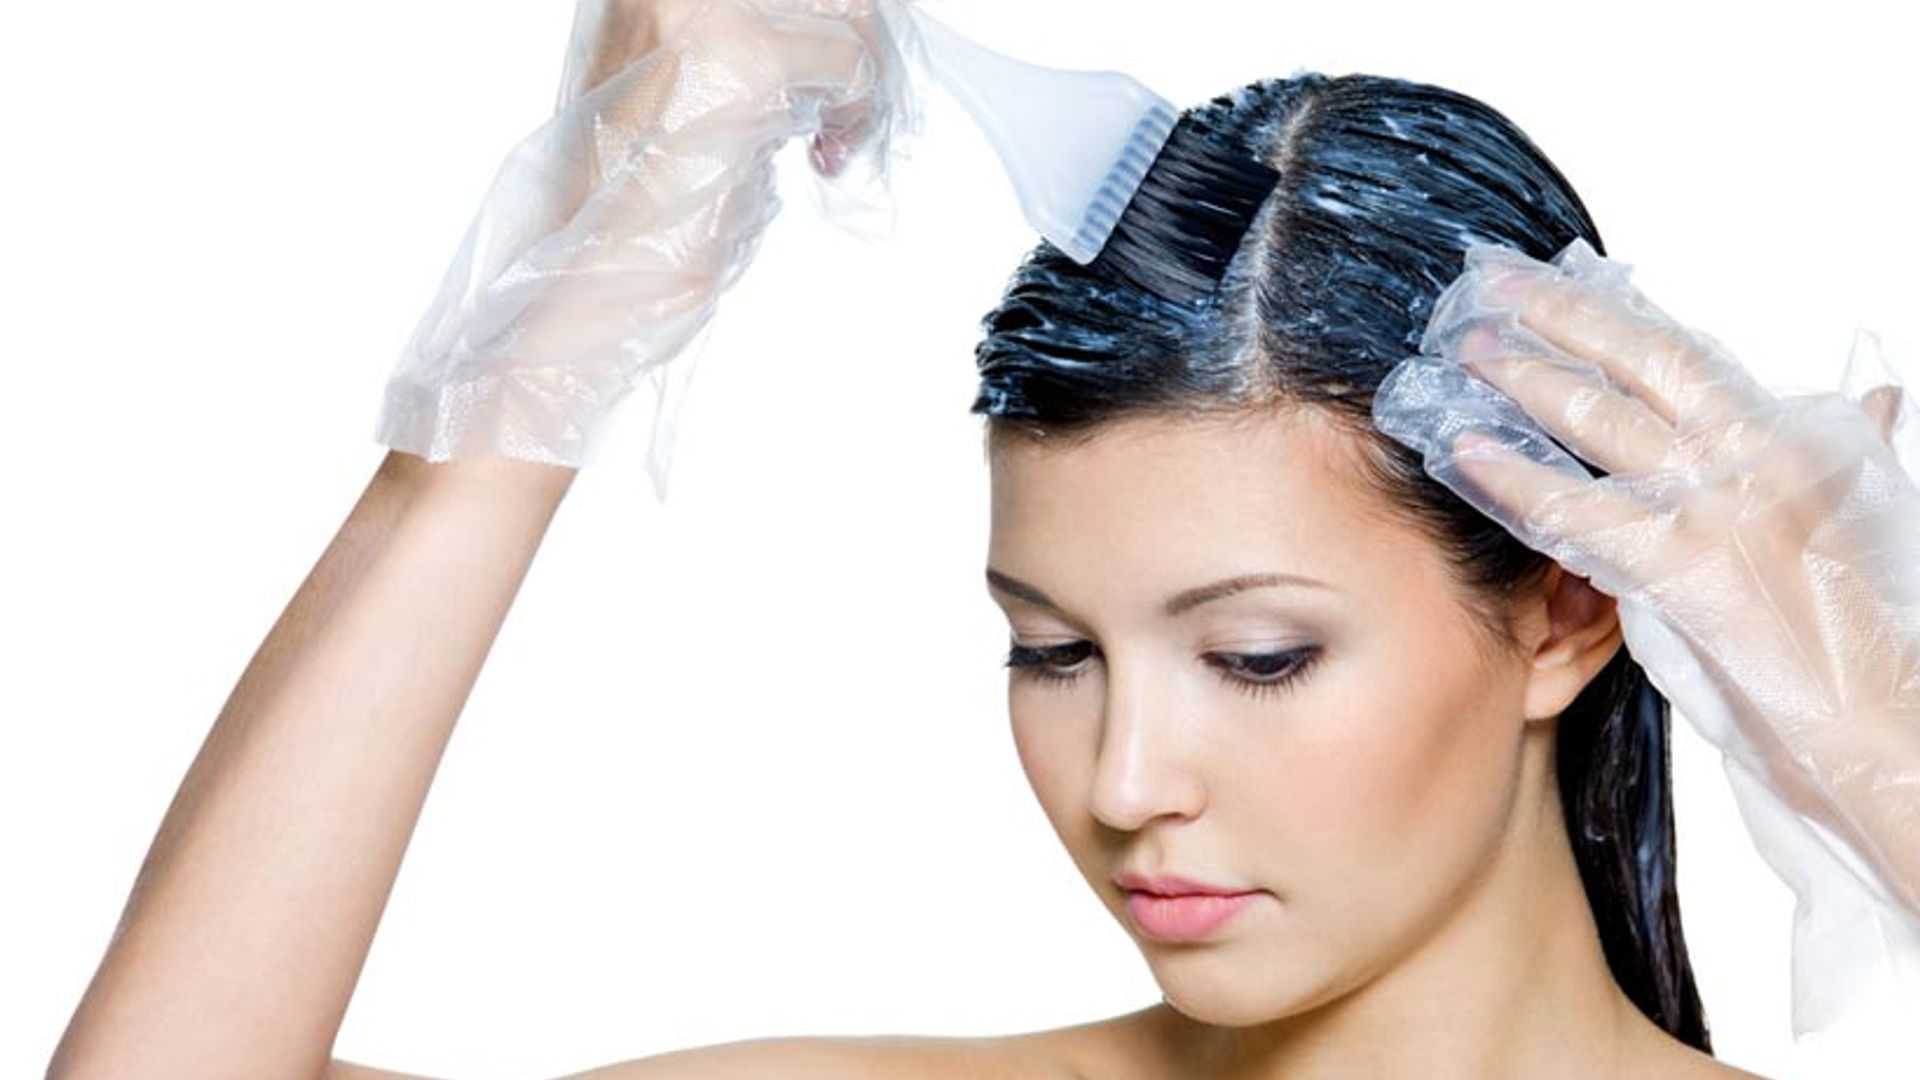 How to Dye Your Hair Blue at Home - wide 11